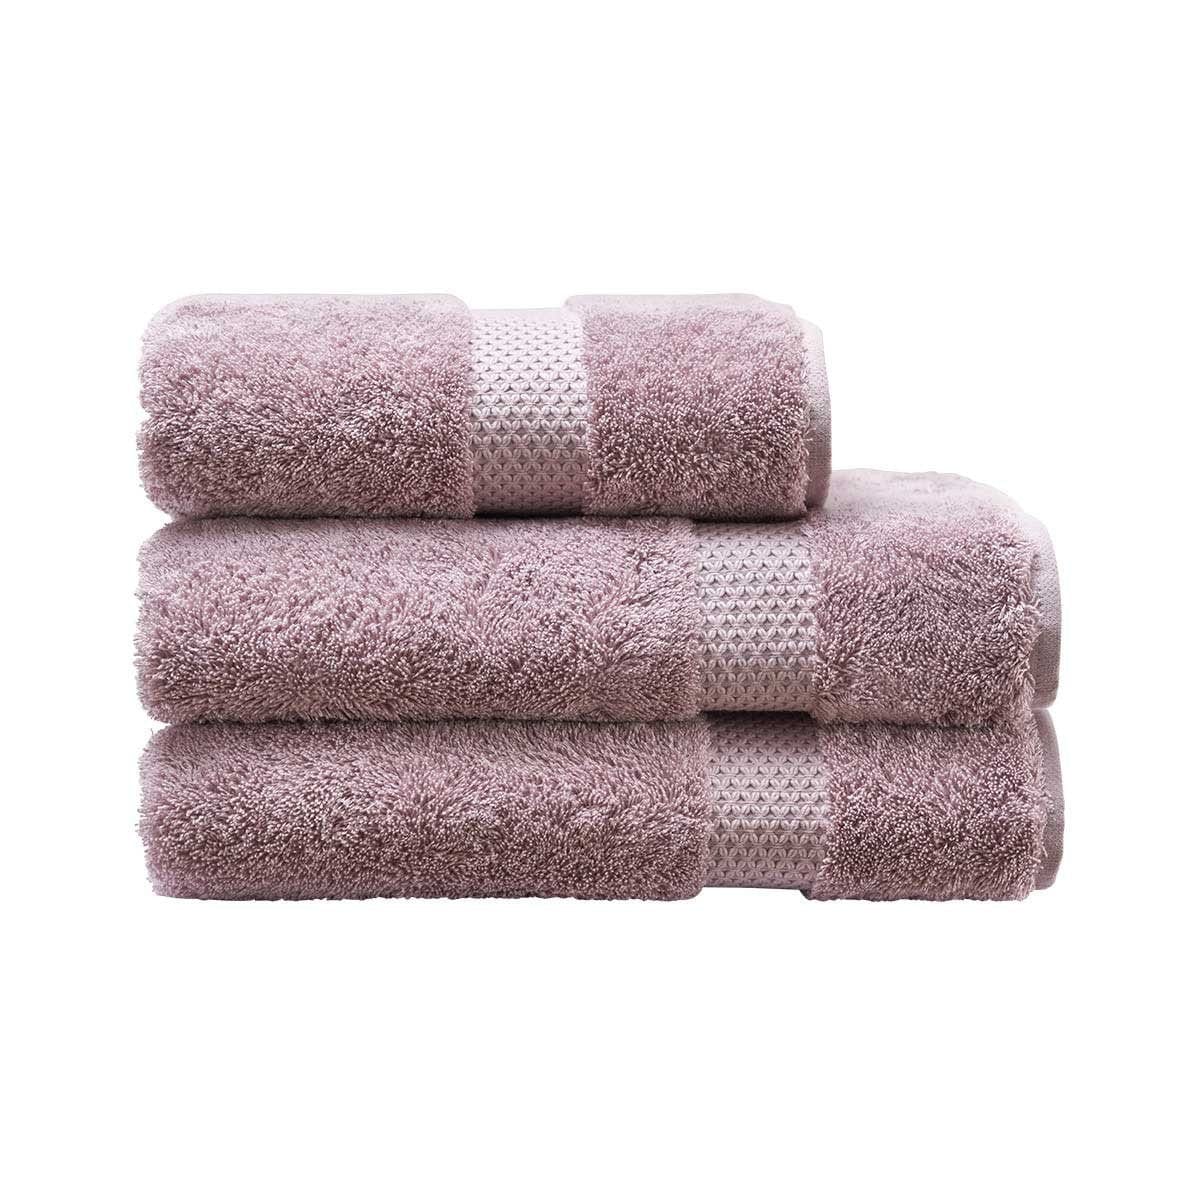 Etoile Lila Bath Towels by Yves Delorme | Fig Linens